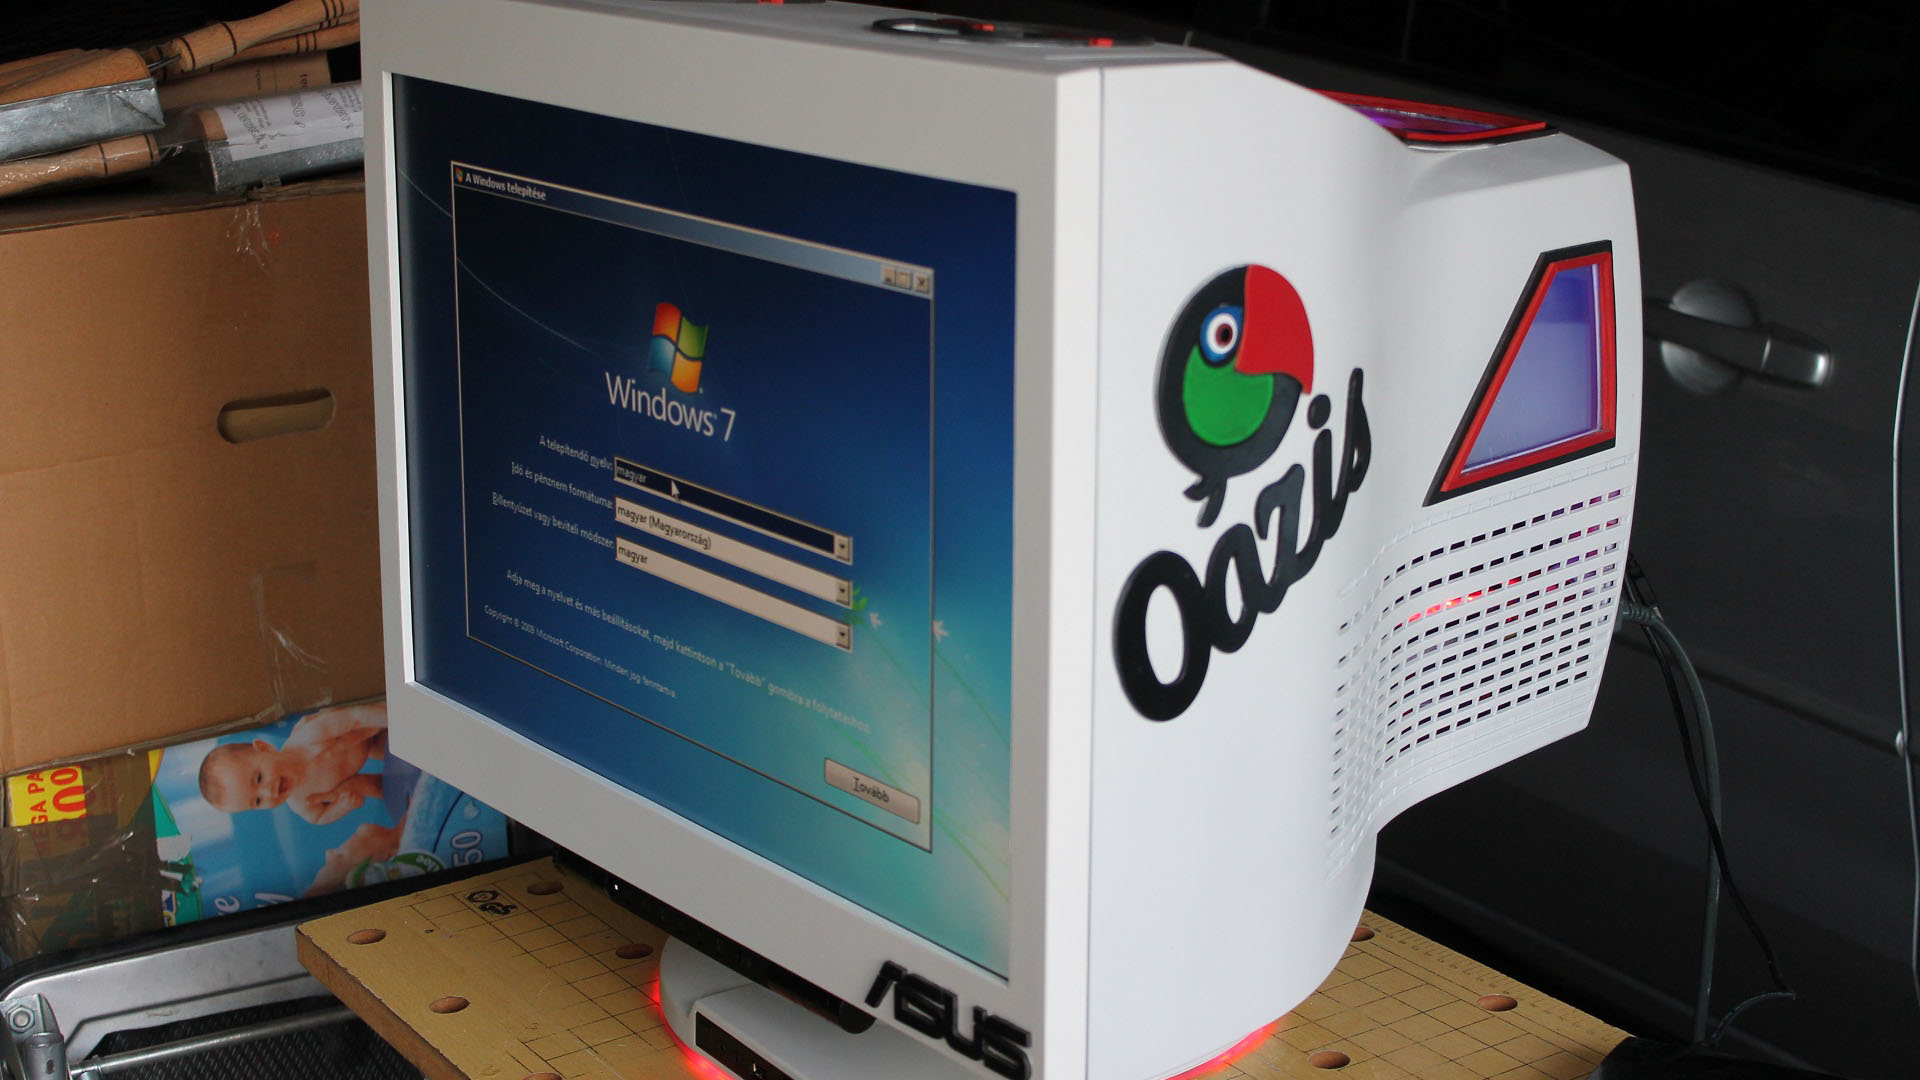 This gaming PC inside a vintage CRT monitor is making us nostalgic